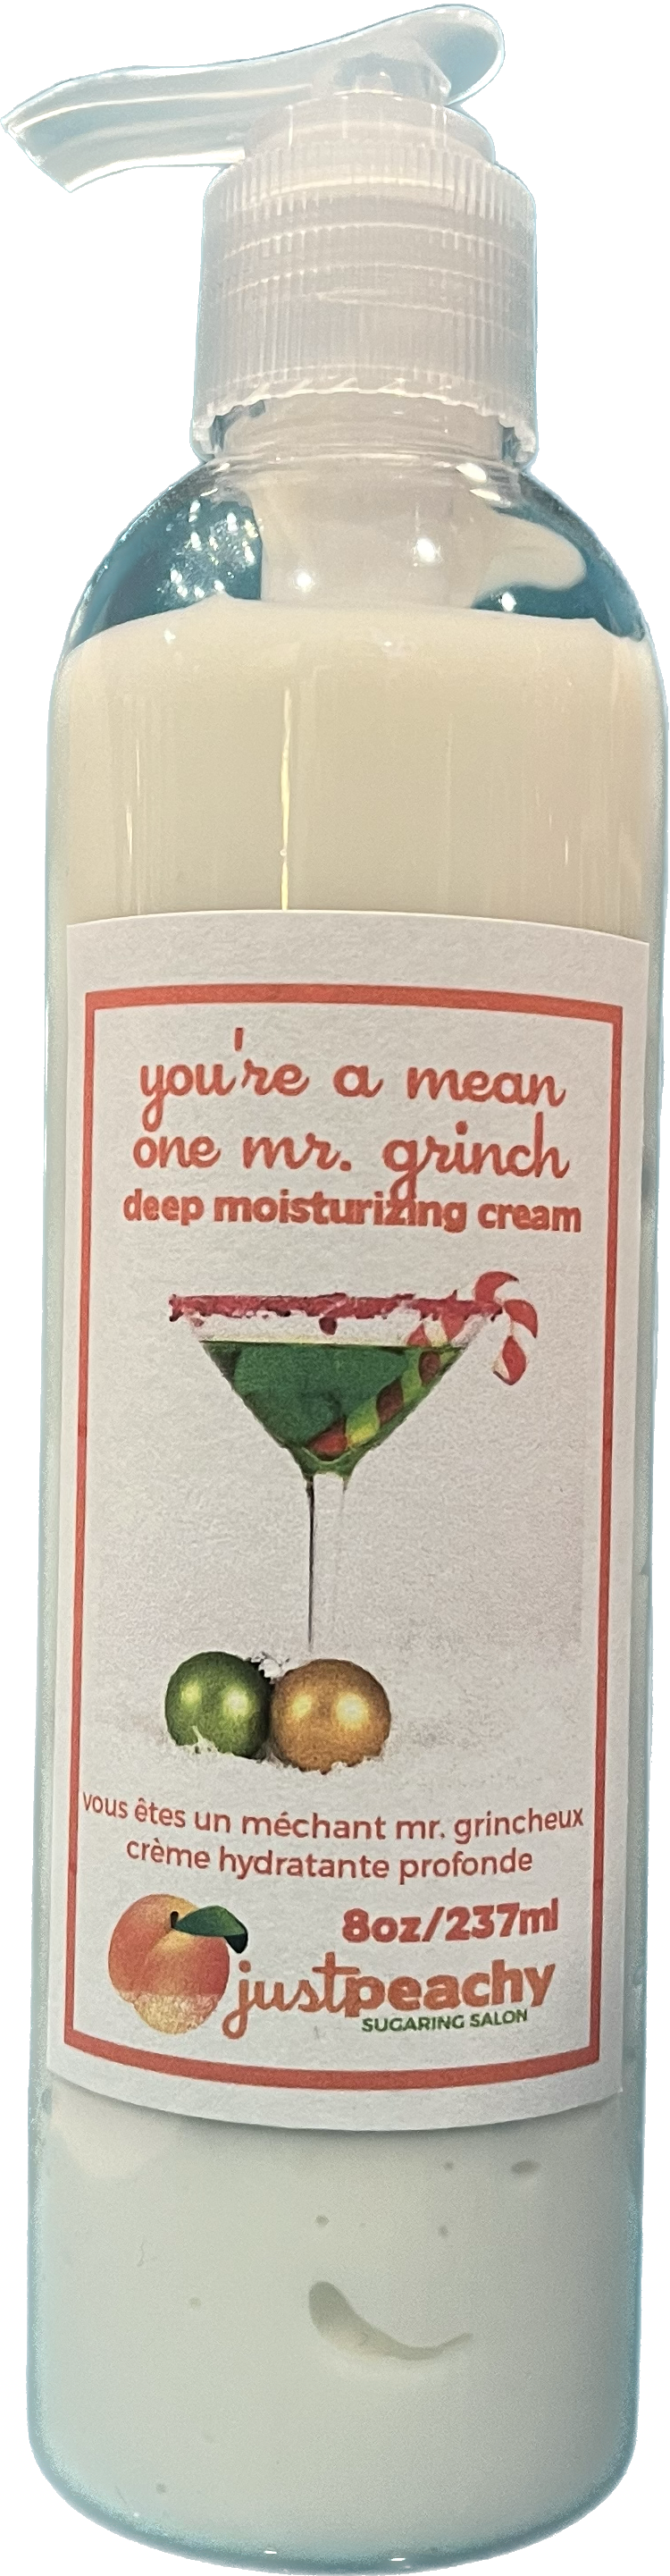 You're a Mean One Mr. Grinch Deep Moisturizing Cream Just Peachy Chilliwack